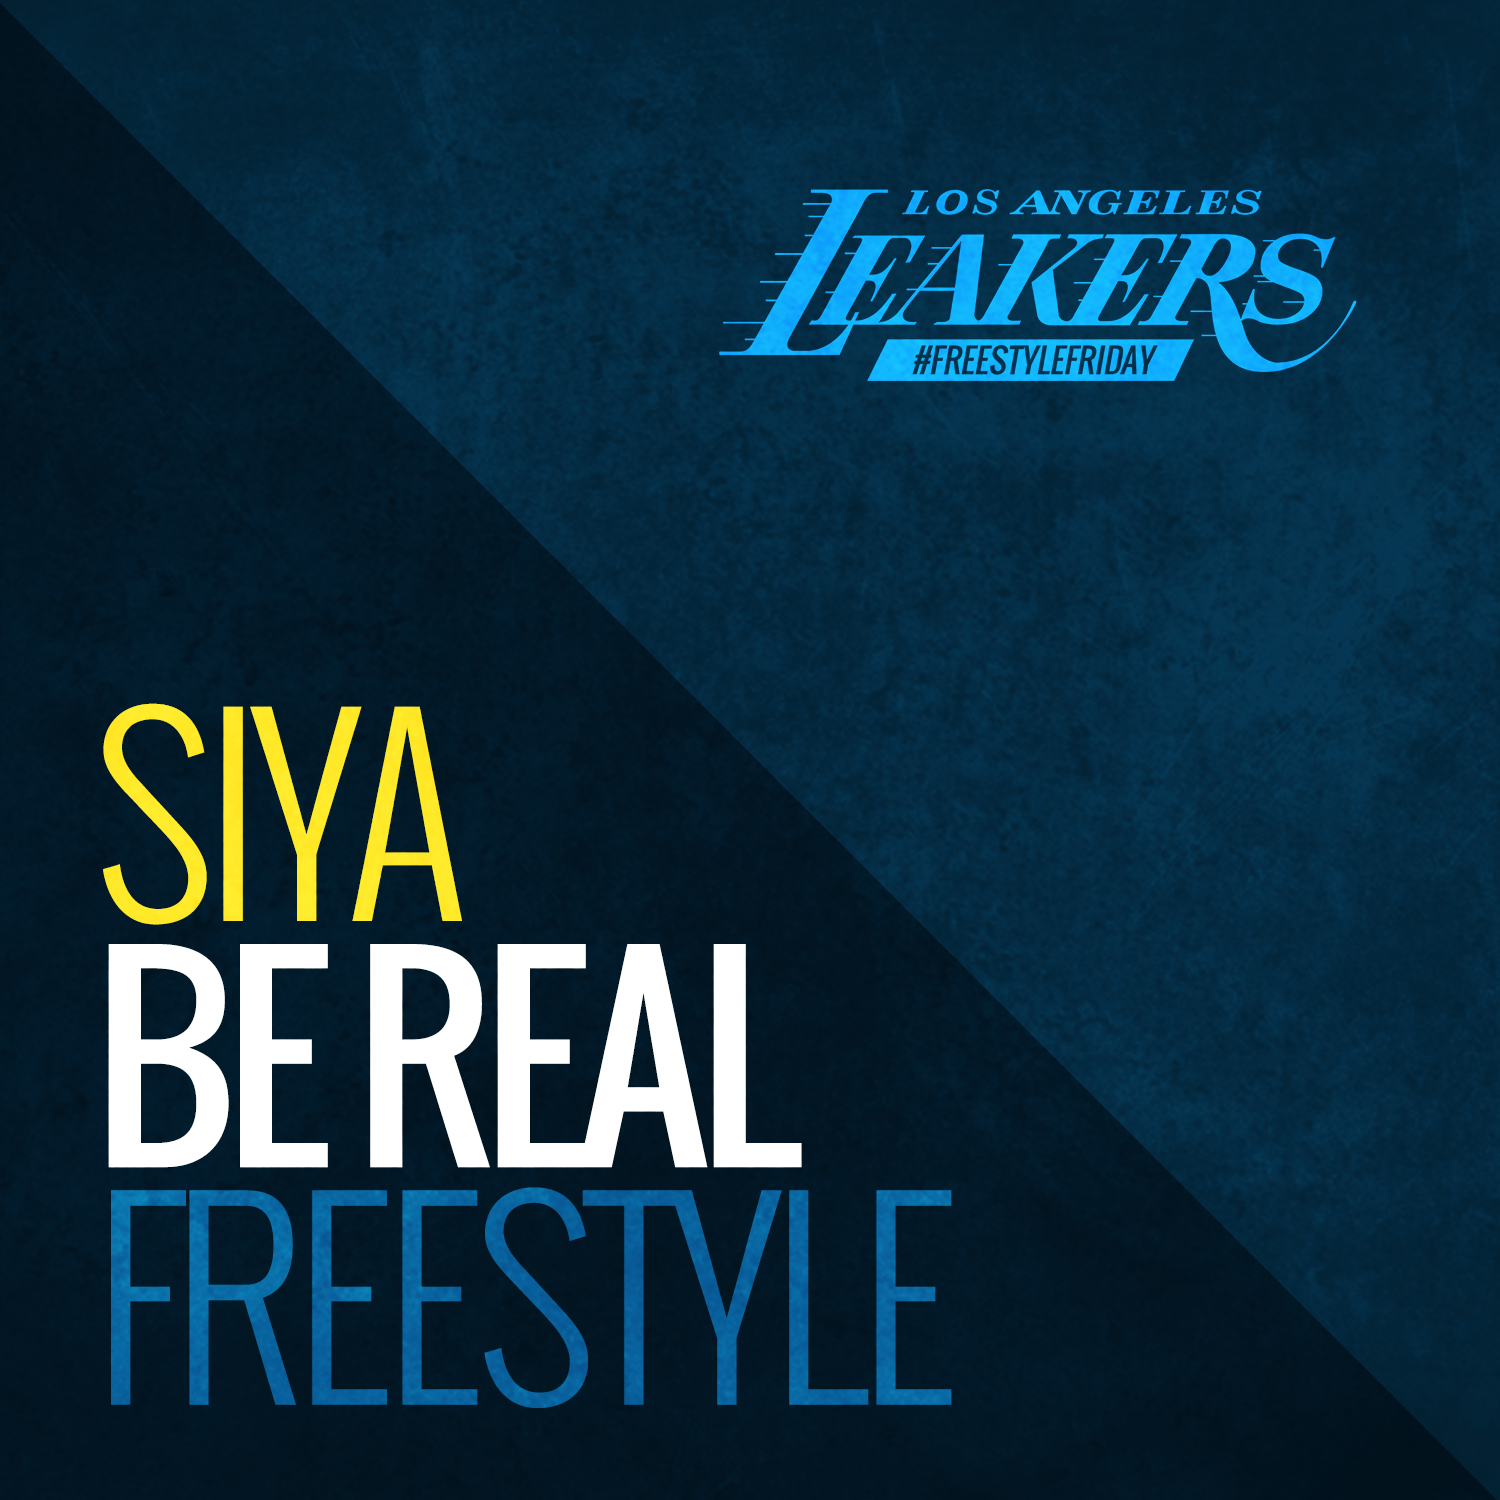 SIYA – “Be Real (L.A. Leakers Freestyle)” (Audio)